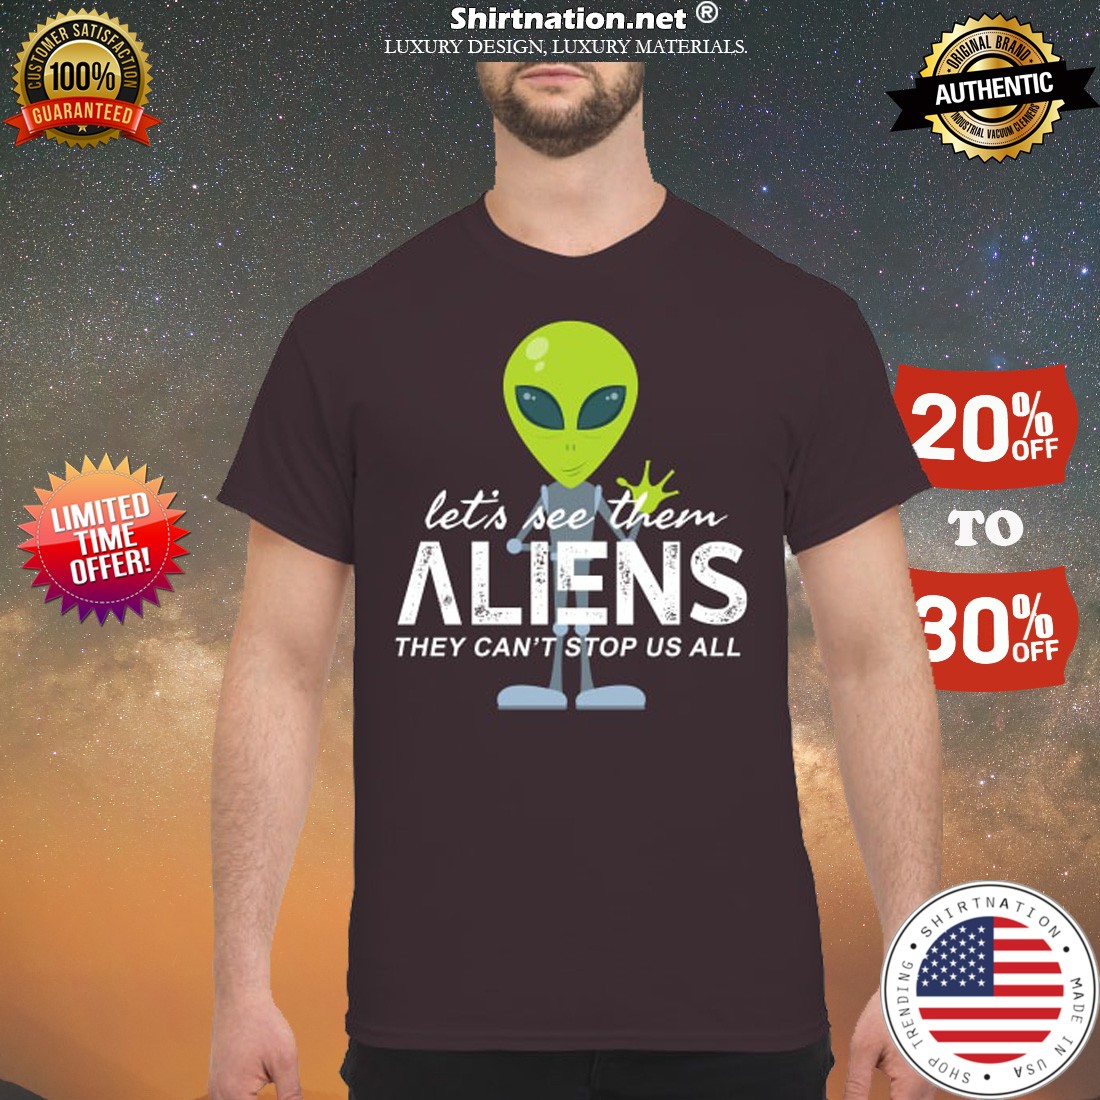 Let's see them aliens they can't stop us all shirt